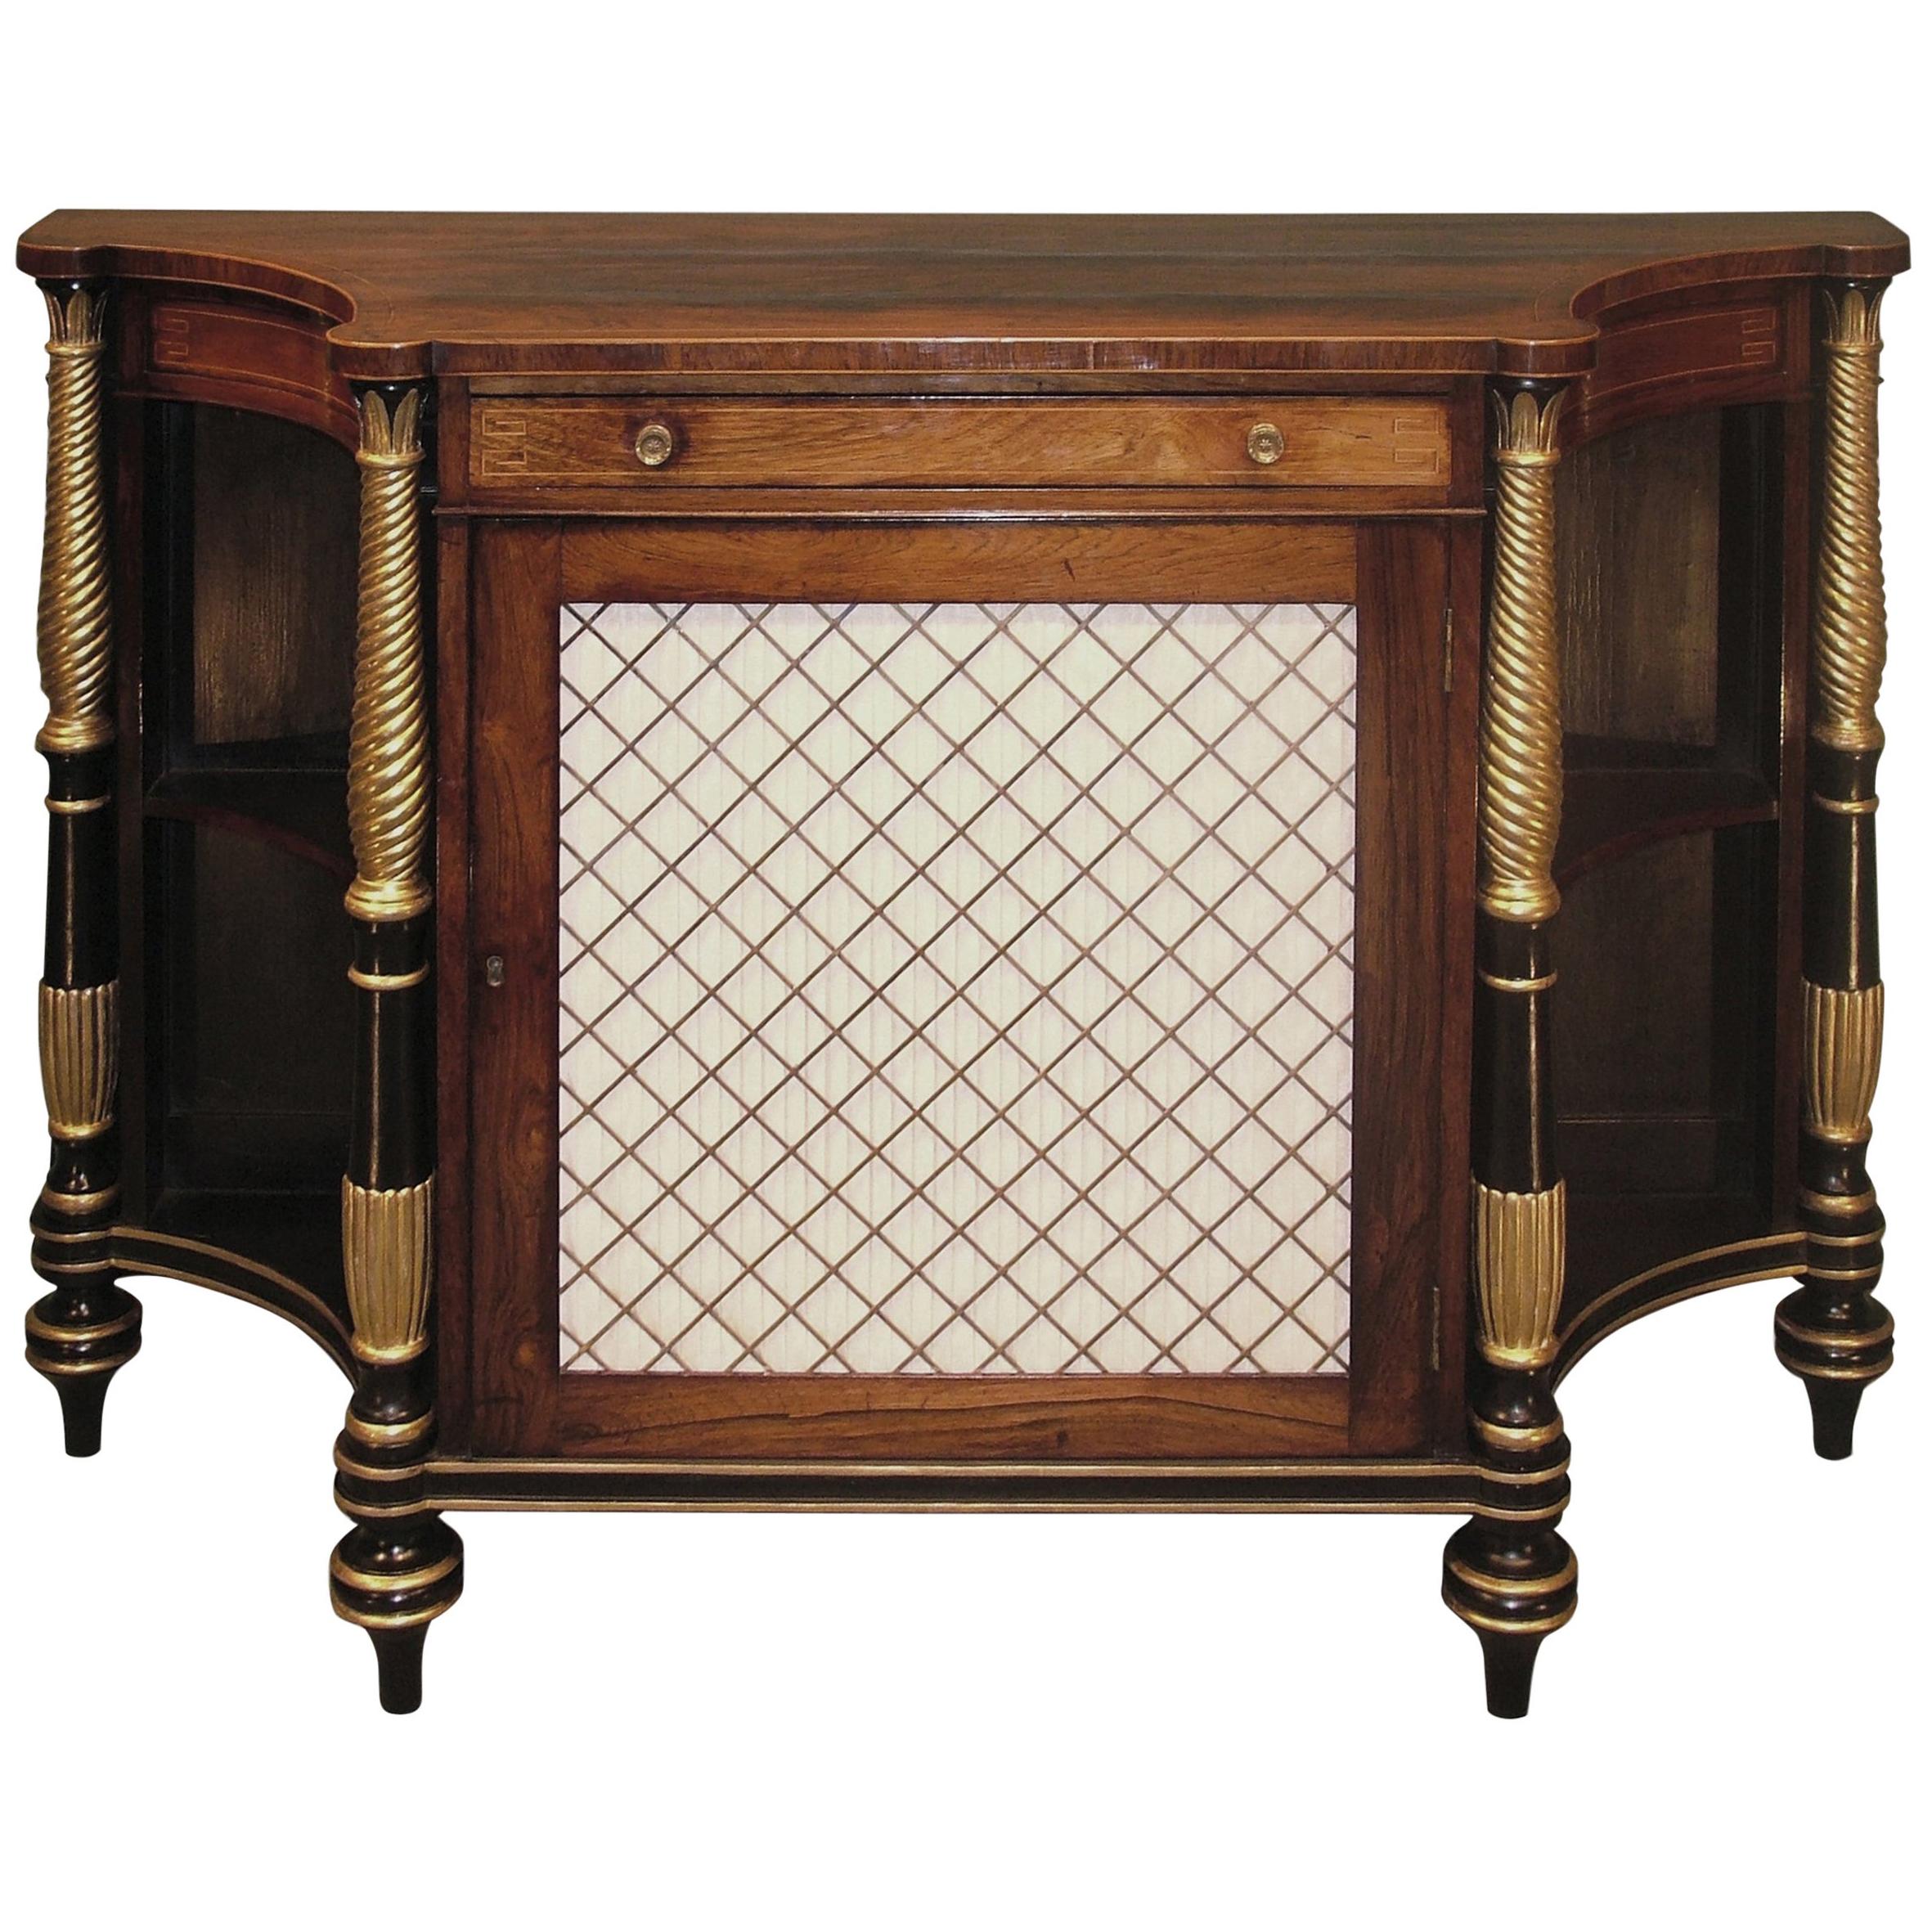 Early 19th Century Regency Rosewood, Giltwood and Black Painted Chiffonier